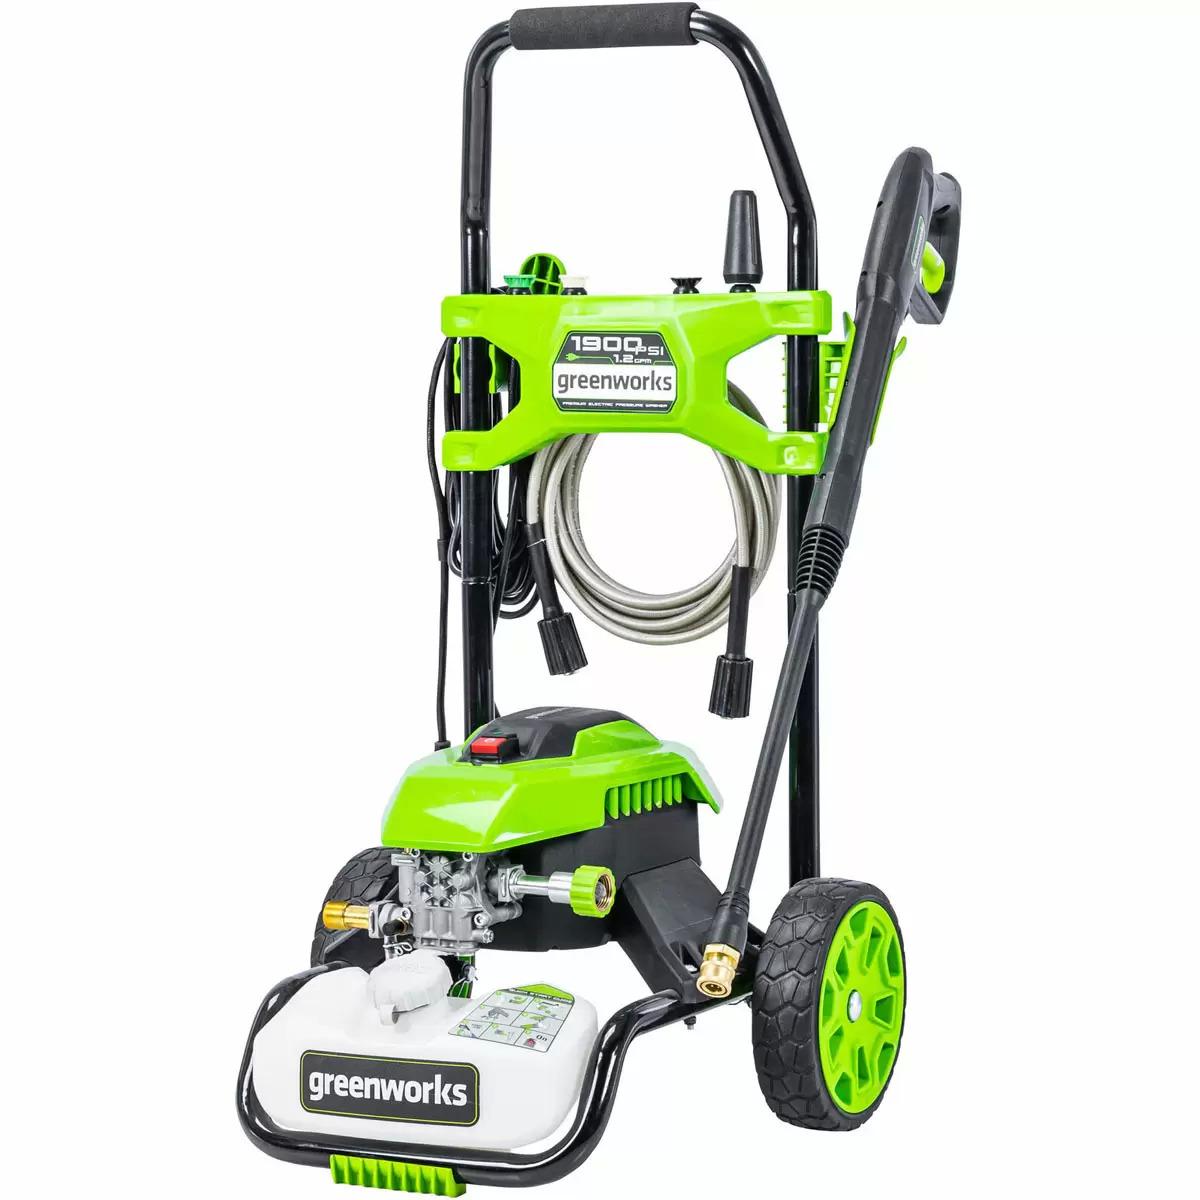 Greenworks 1900 PSI 1.2 GPM Pressure Washer GPW1900 for $119.99 Shipped